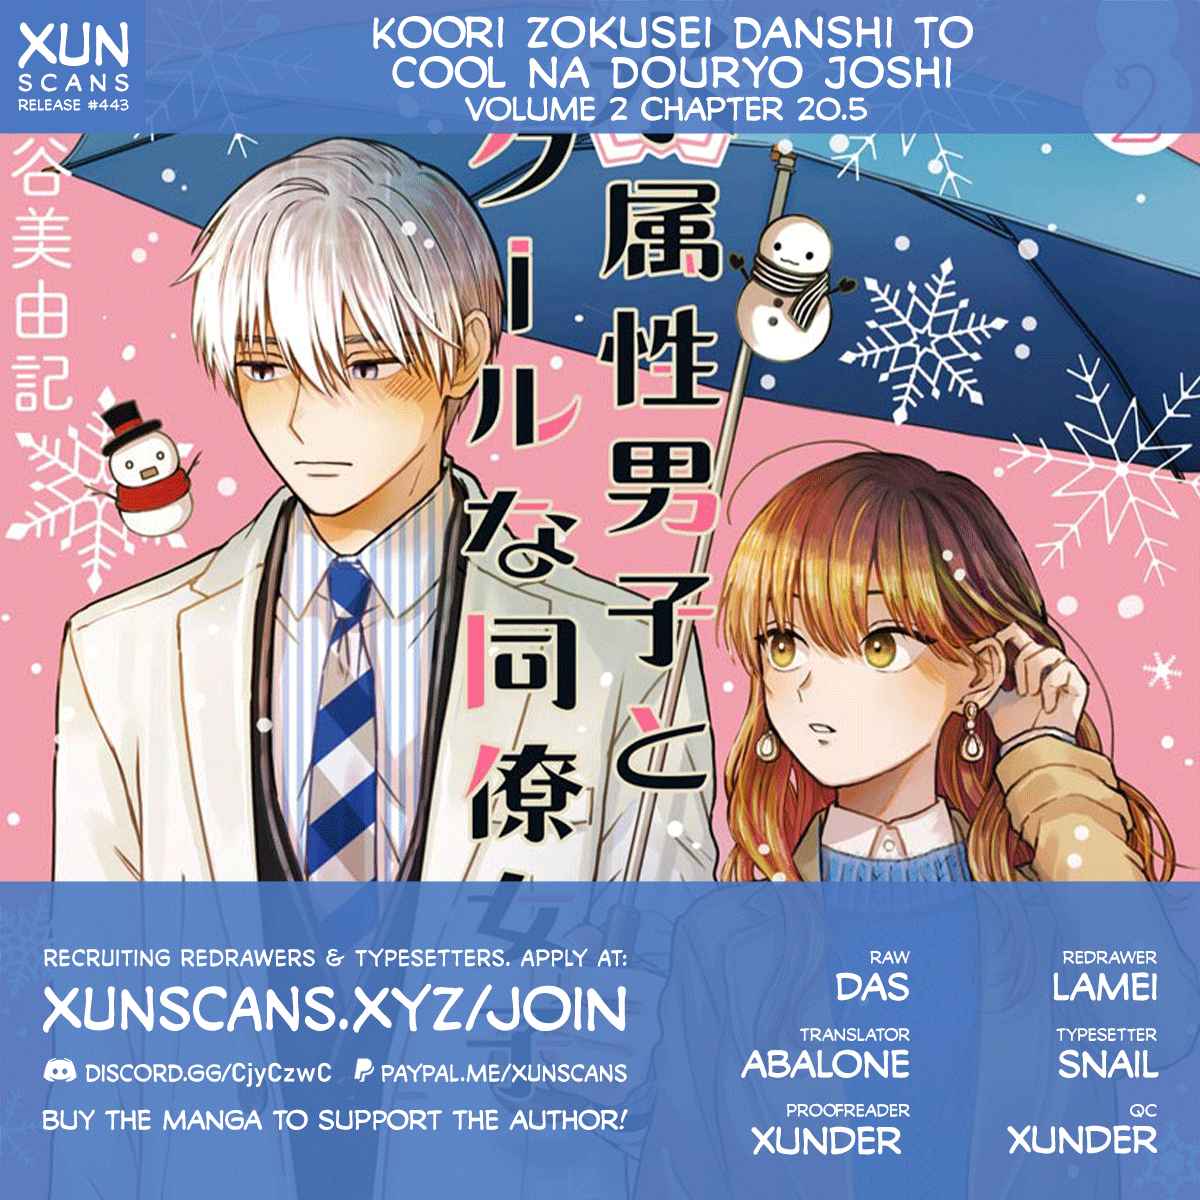 Ice Guy and the Cool Female Colleague Vol. 2 Ch. 20.5